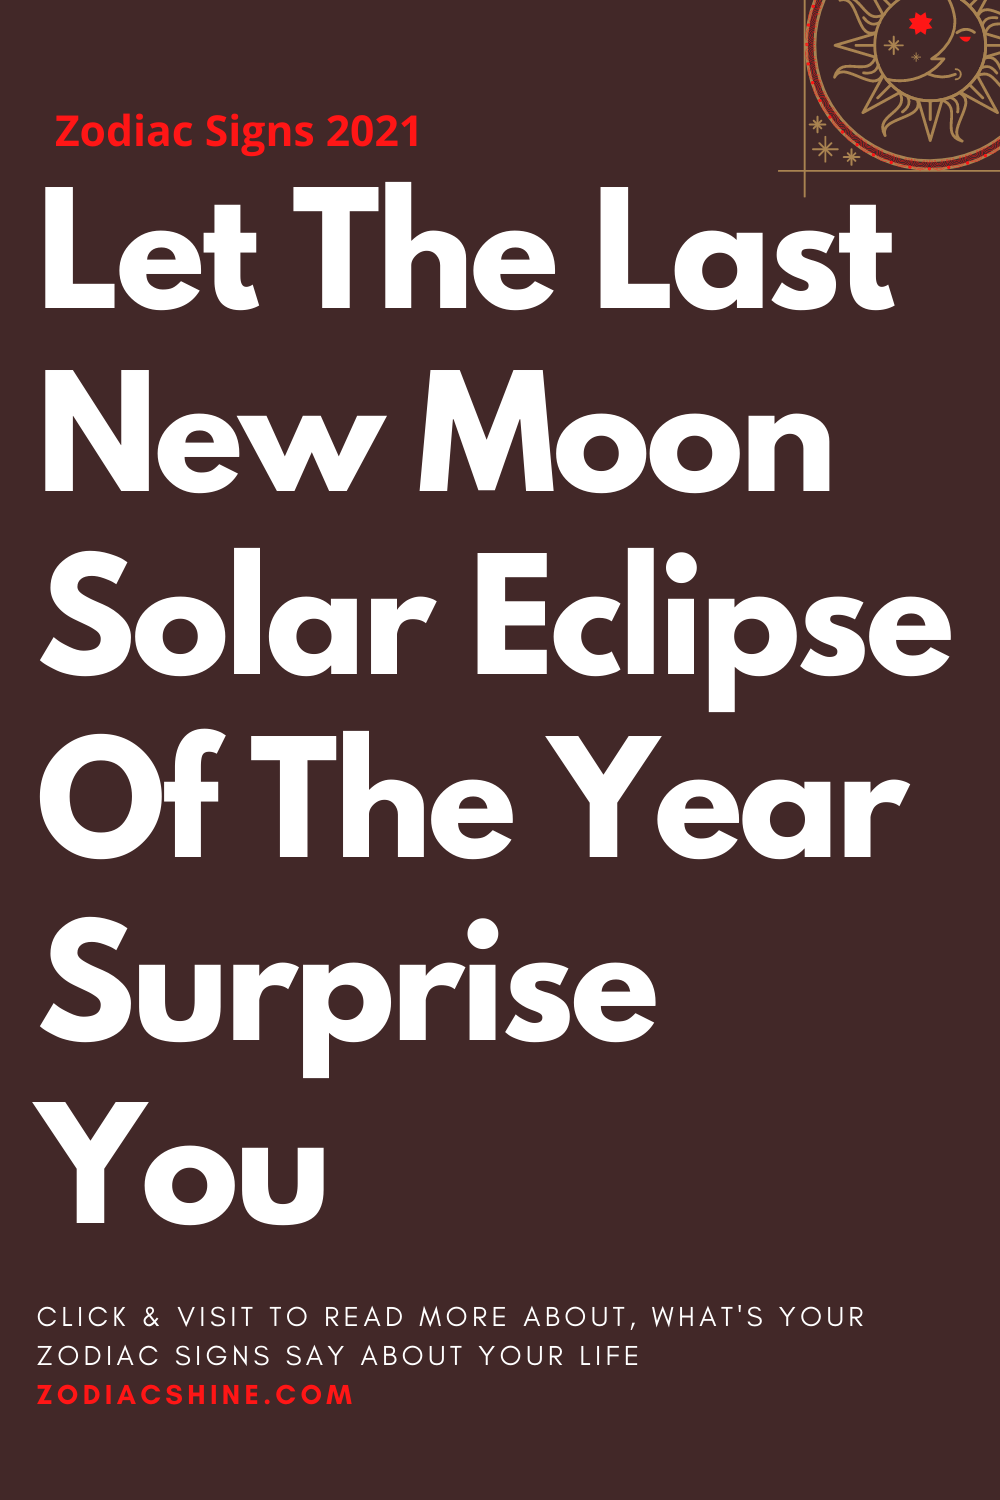 Let The Last New Moon Solar Eclipse Of The Year Surprise You